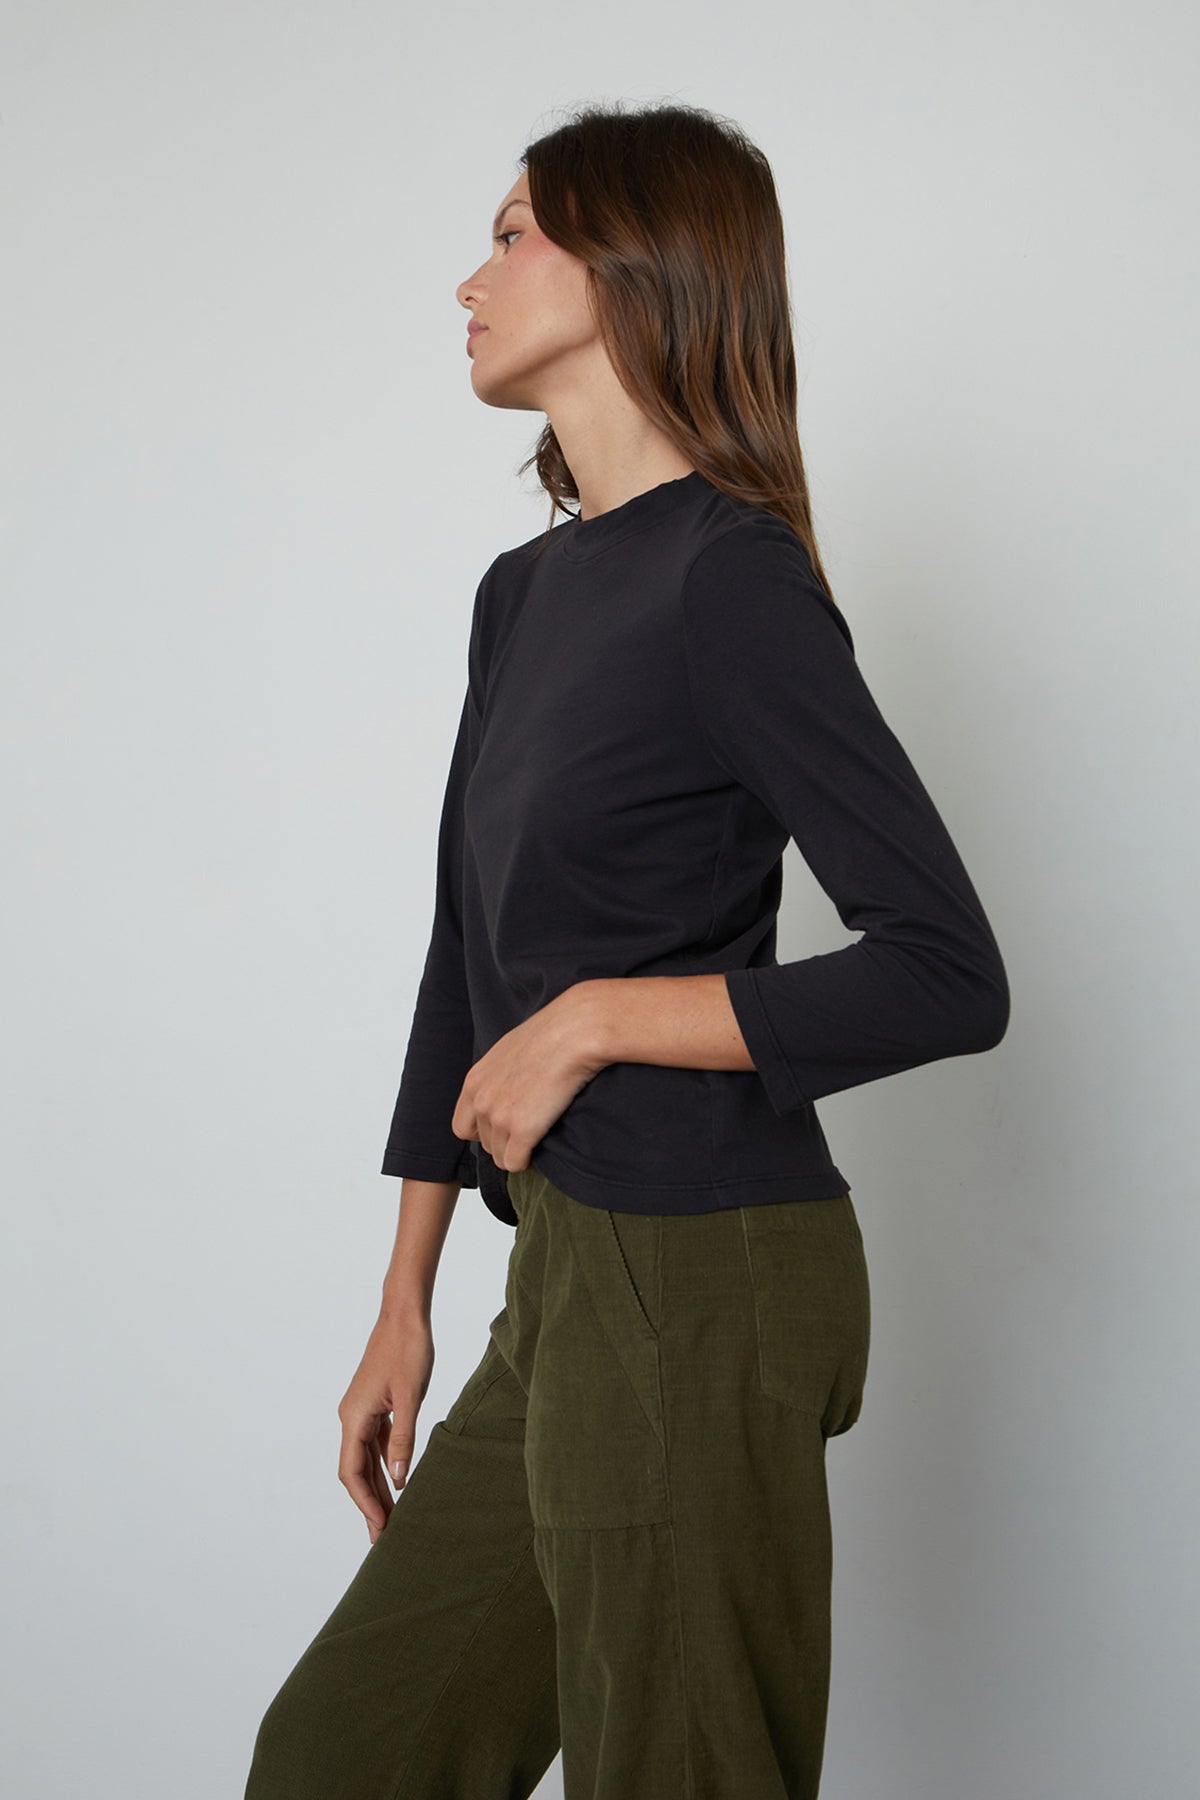 Quinny 3/4 Sleeve Mock Neck Tee in black with Vera Pant in Aloe side view-25084021964993